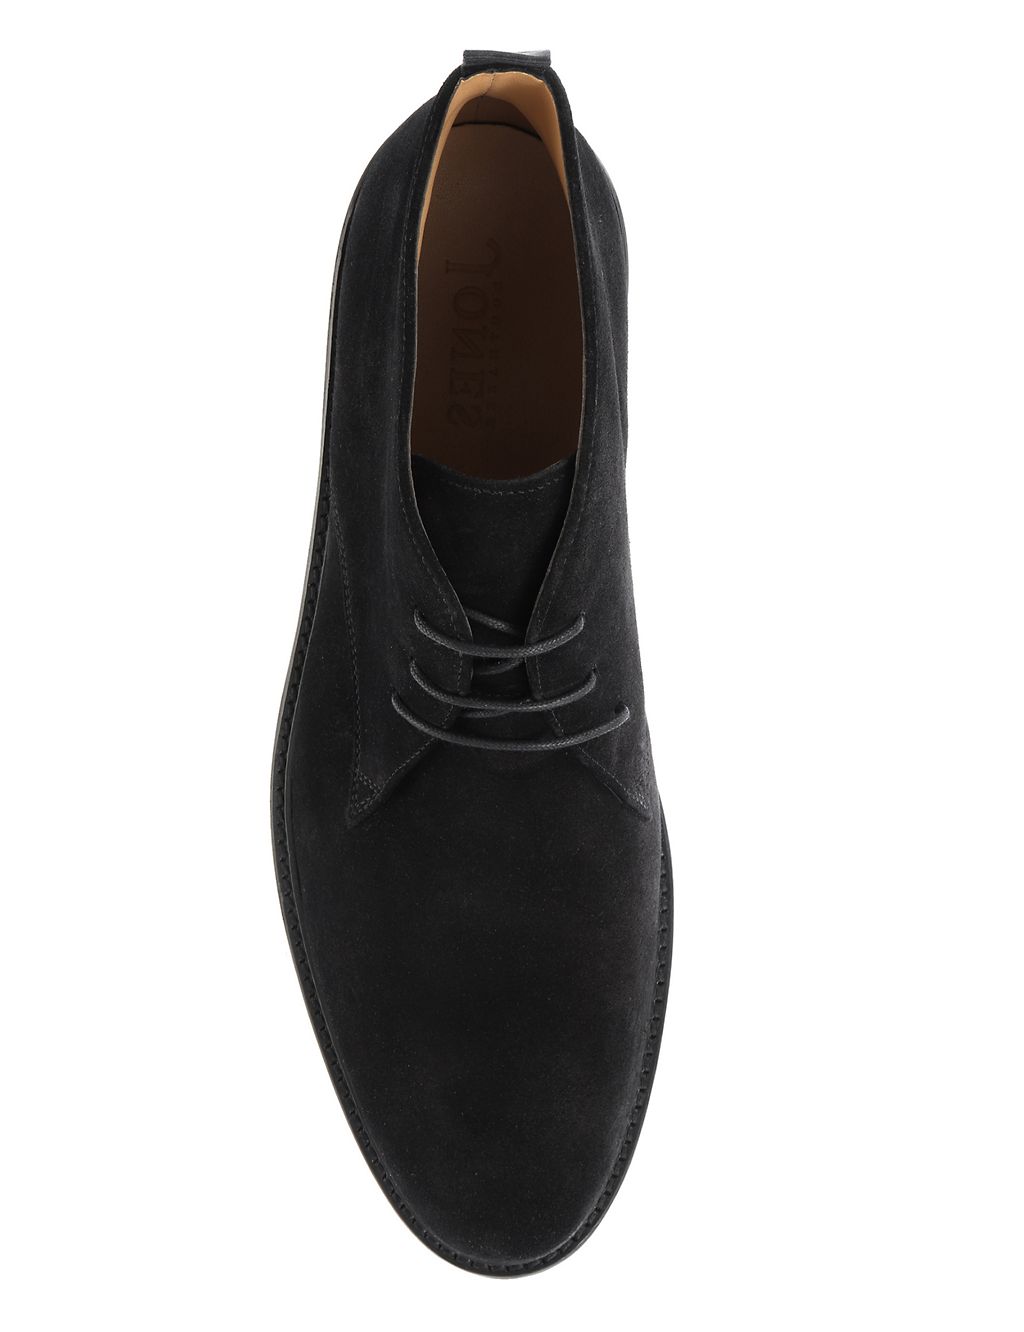 Suede Pull-on Chukka Boots 2 of 6